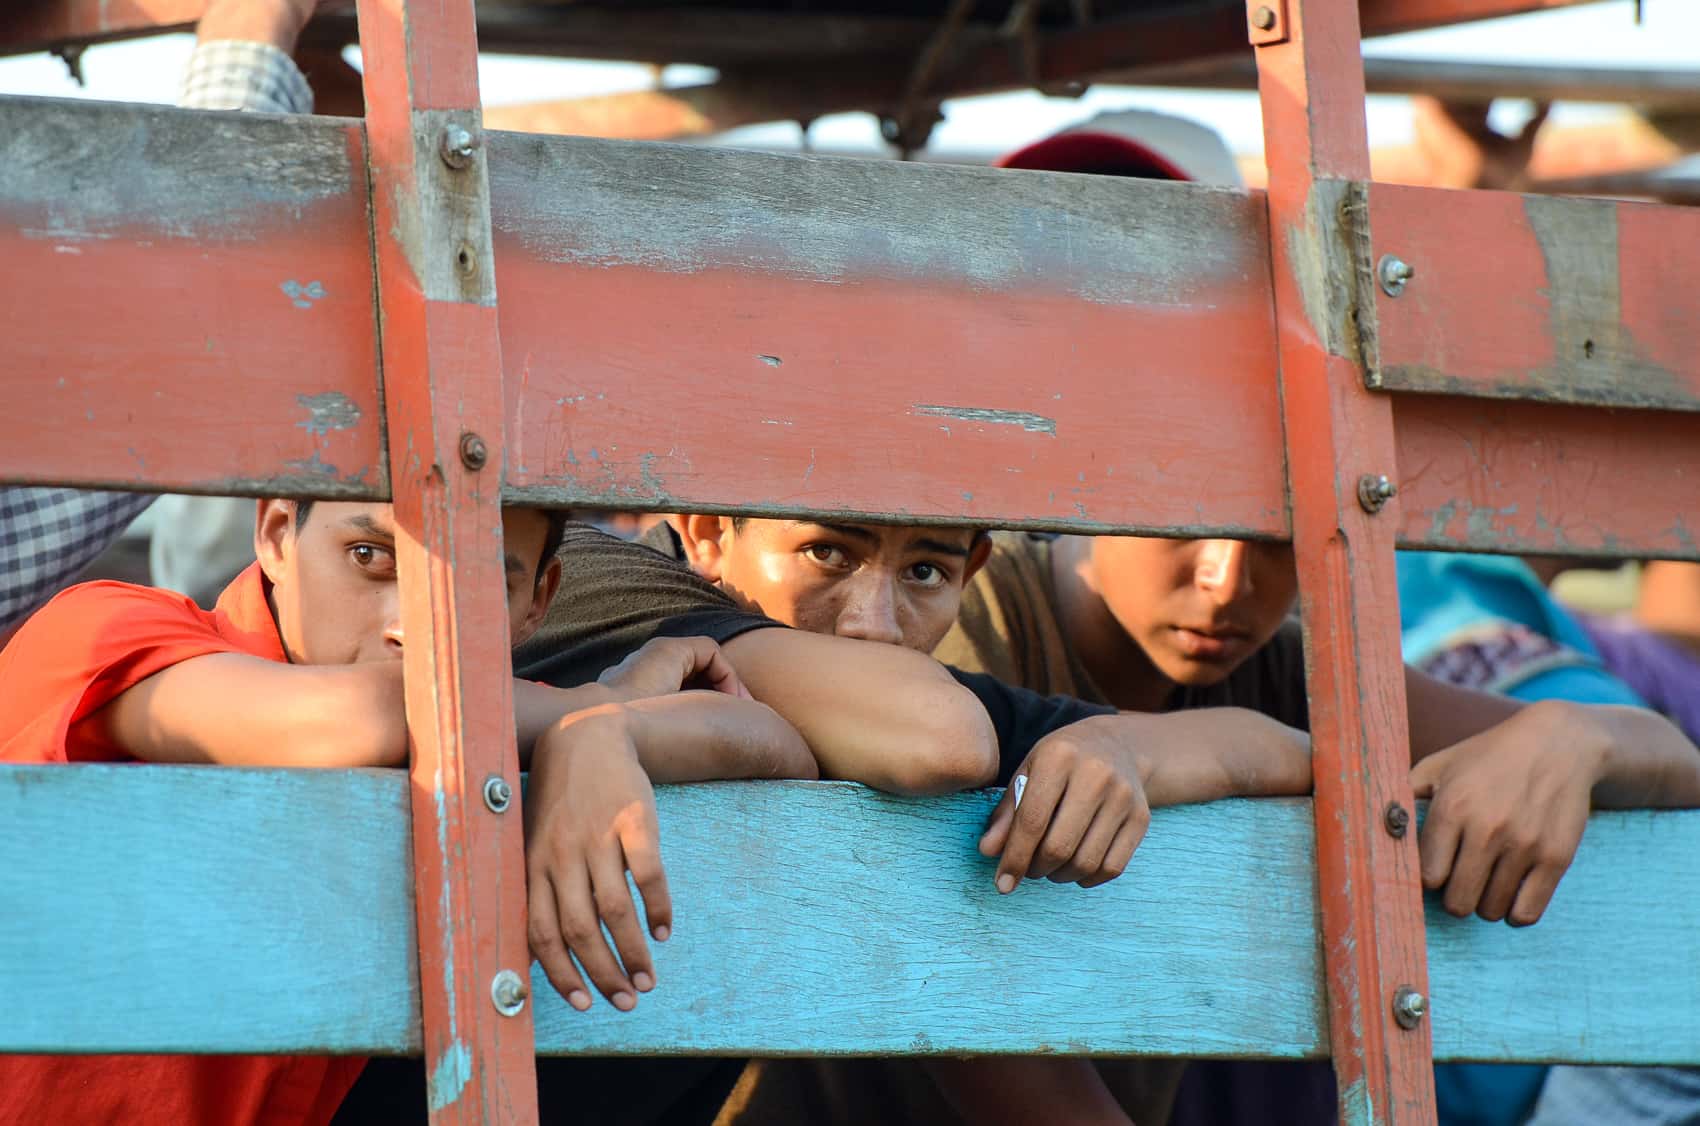 Nicaraguan migrants arrives at the Costa Rican migration offices in Los Chiles. After processing, the migrants will be sent back to Nicaragua. April 28, 2015